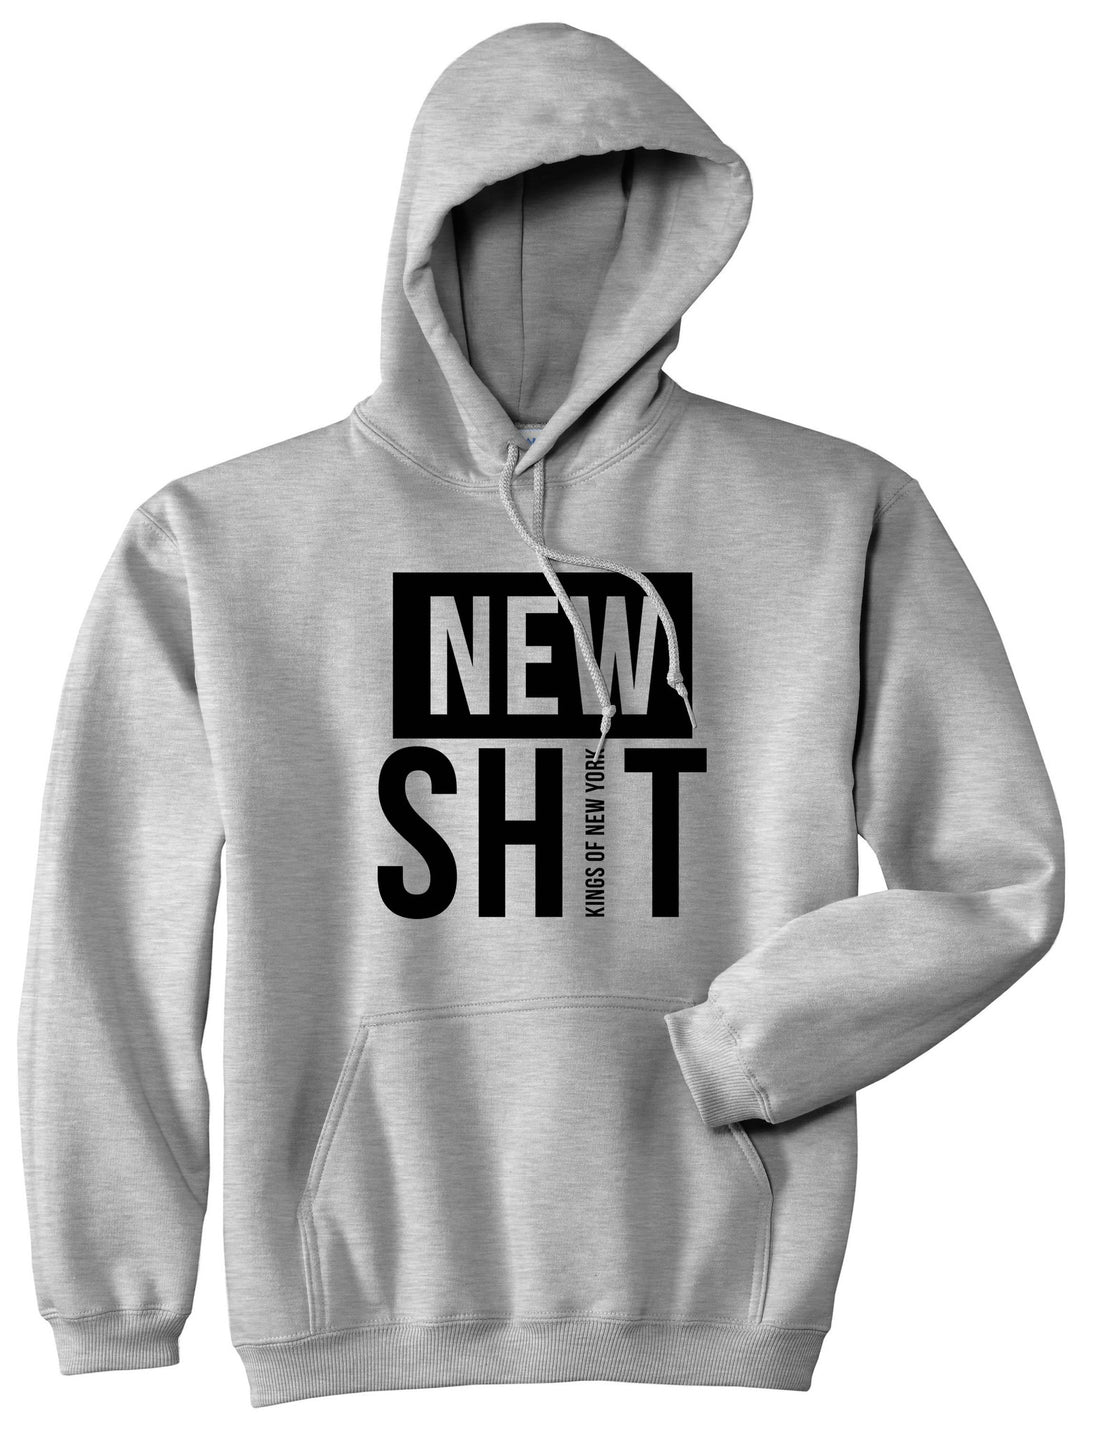 New Shit Pullover Hoodie Hoody in Grey by Kings Of NY